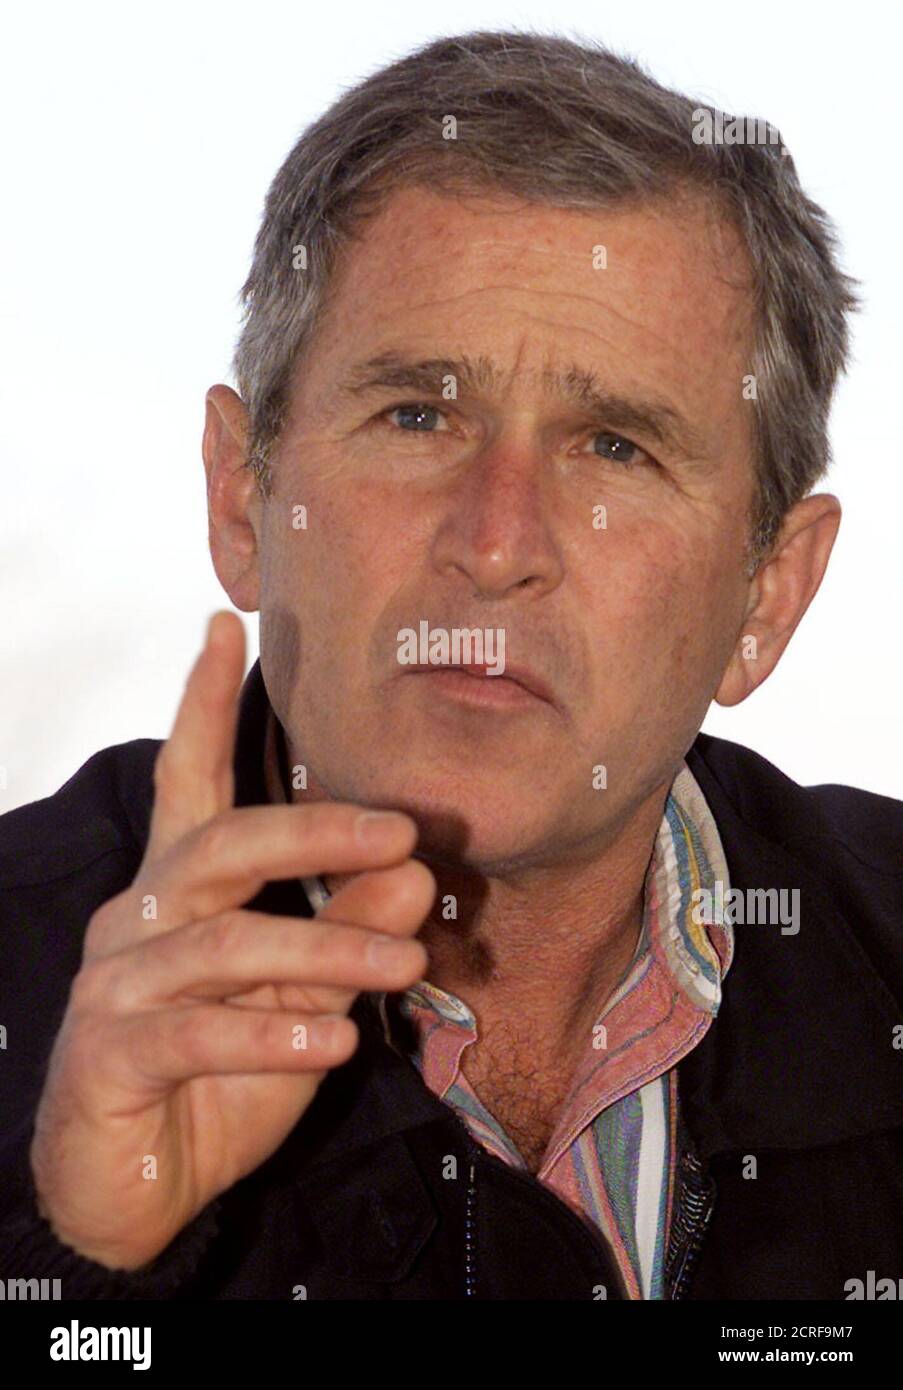 President-elect George W. Bush makes a point during a meeting with 19 Republican Governors at his ranch in Crawford, Texas, January 6, 2001. The Governors discussed with Bush issues involving the economy, education and results of the President-elect's meetings held earlier this week.  KL/HB Stock Photo